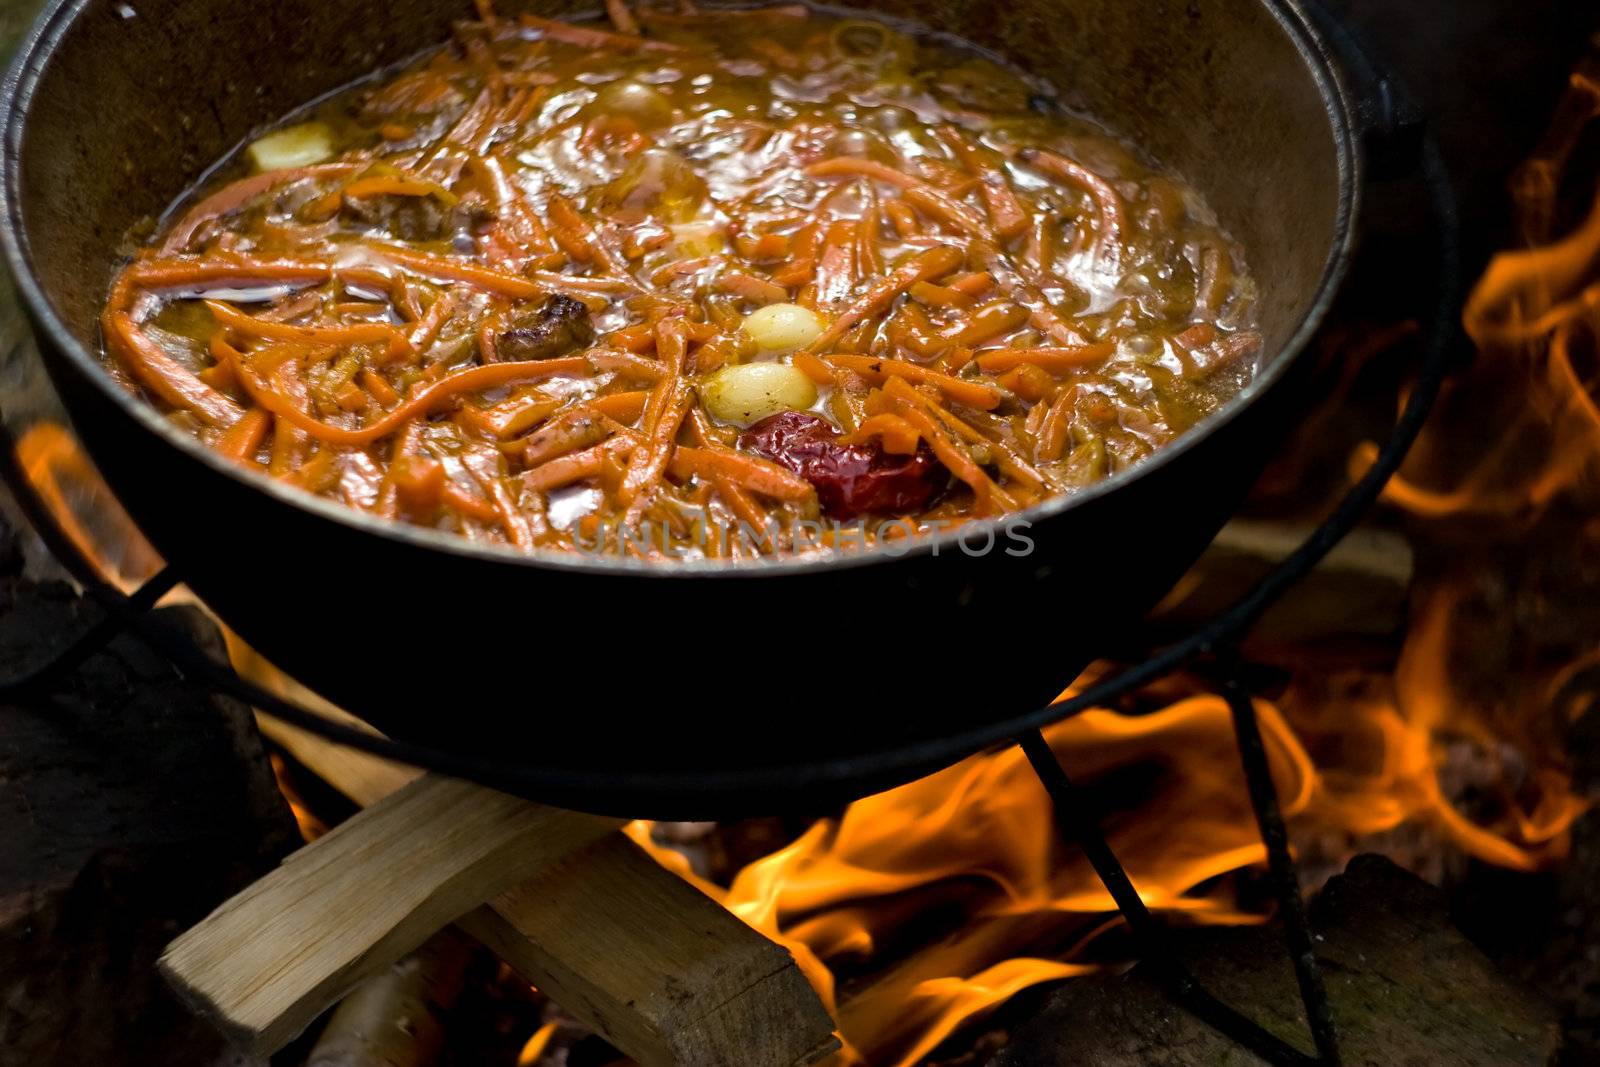 Cooking the traditional Uzbec pilaf in cauldron on fire